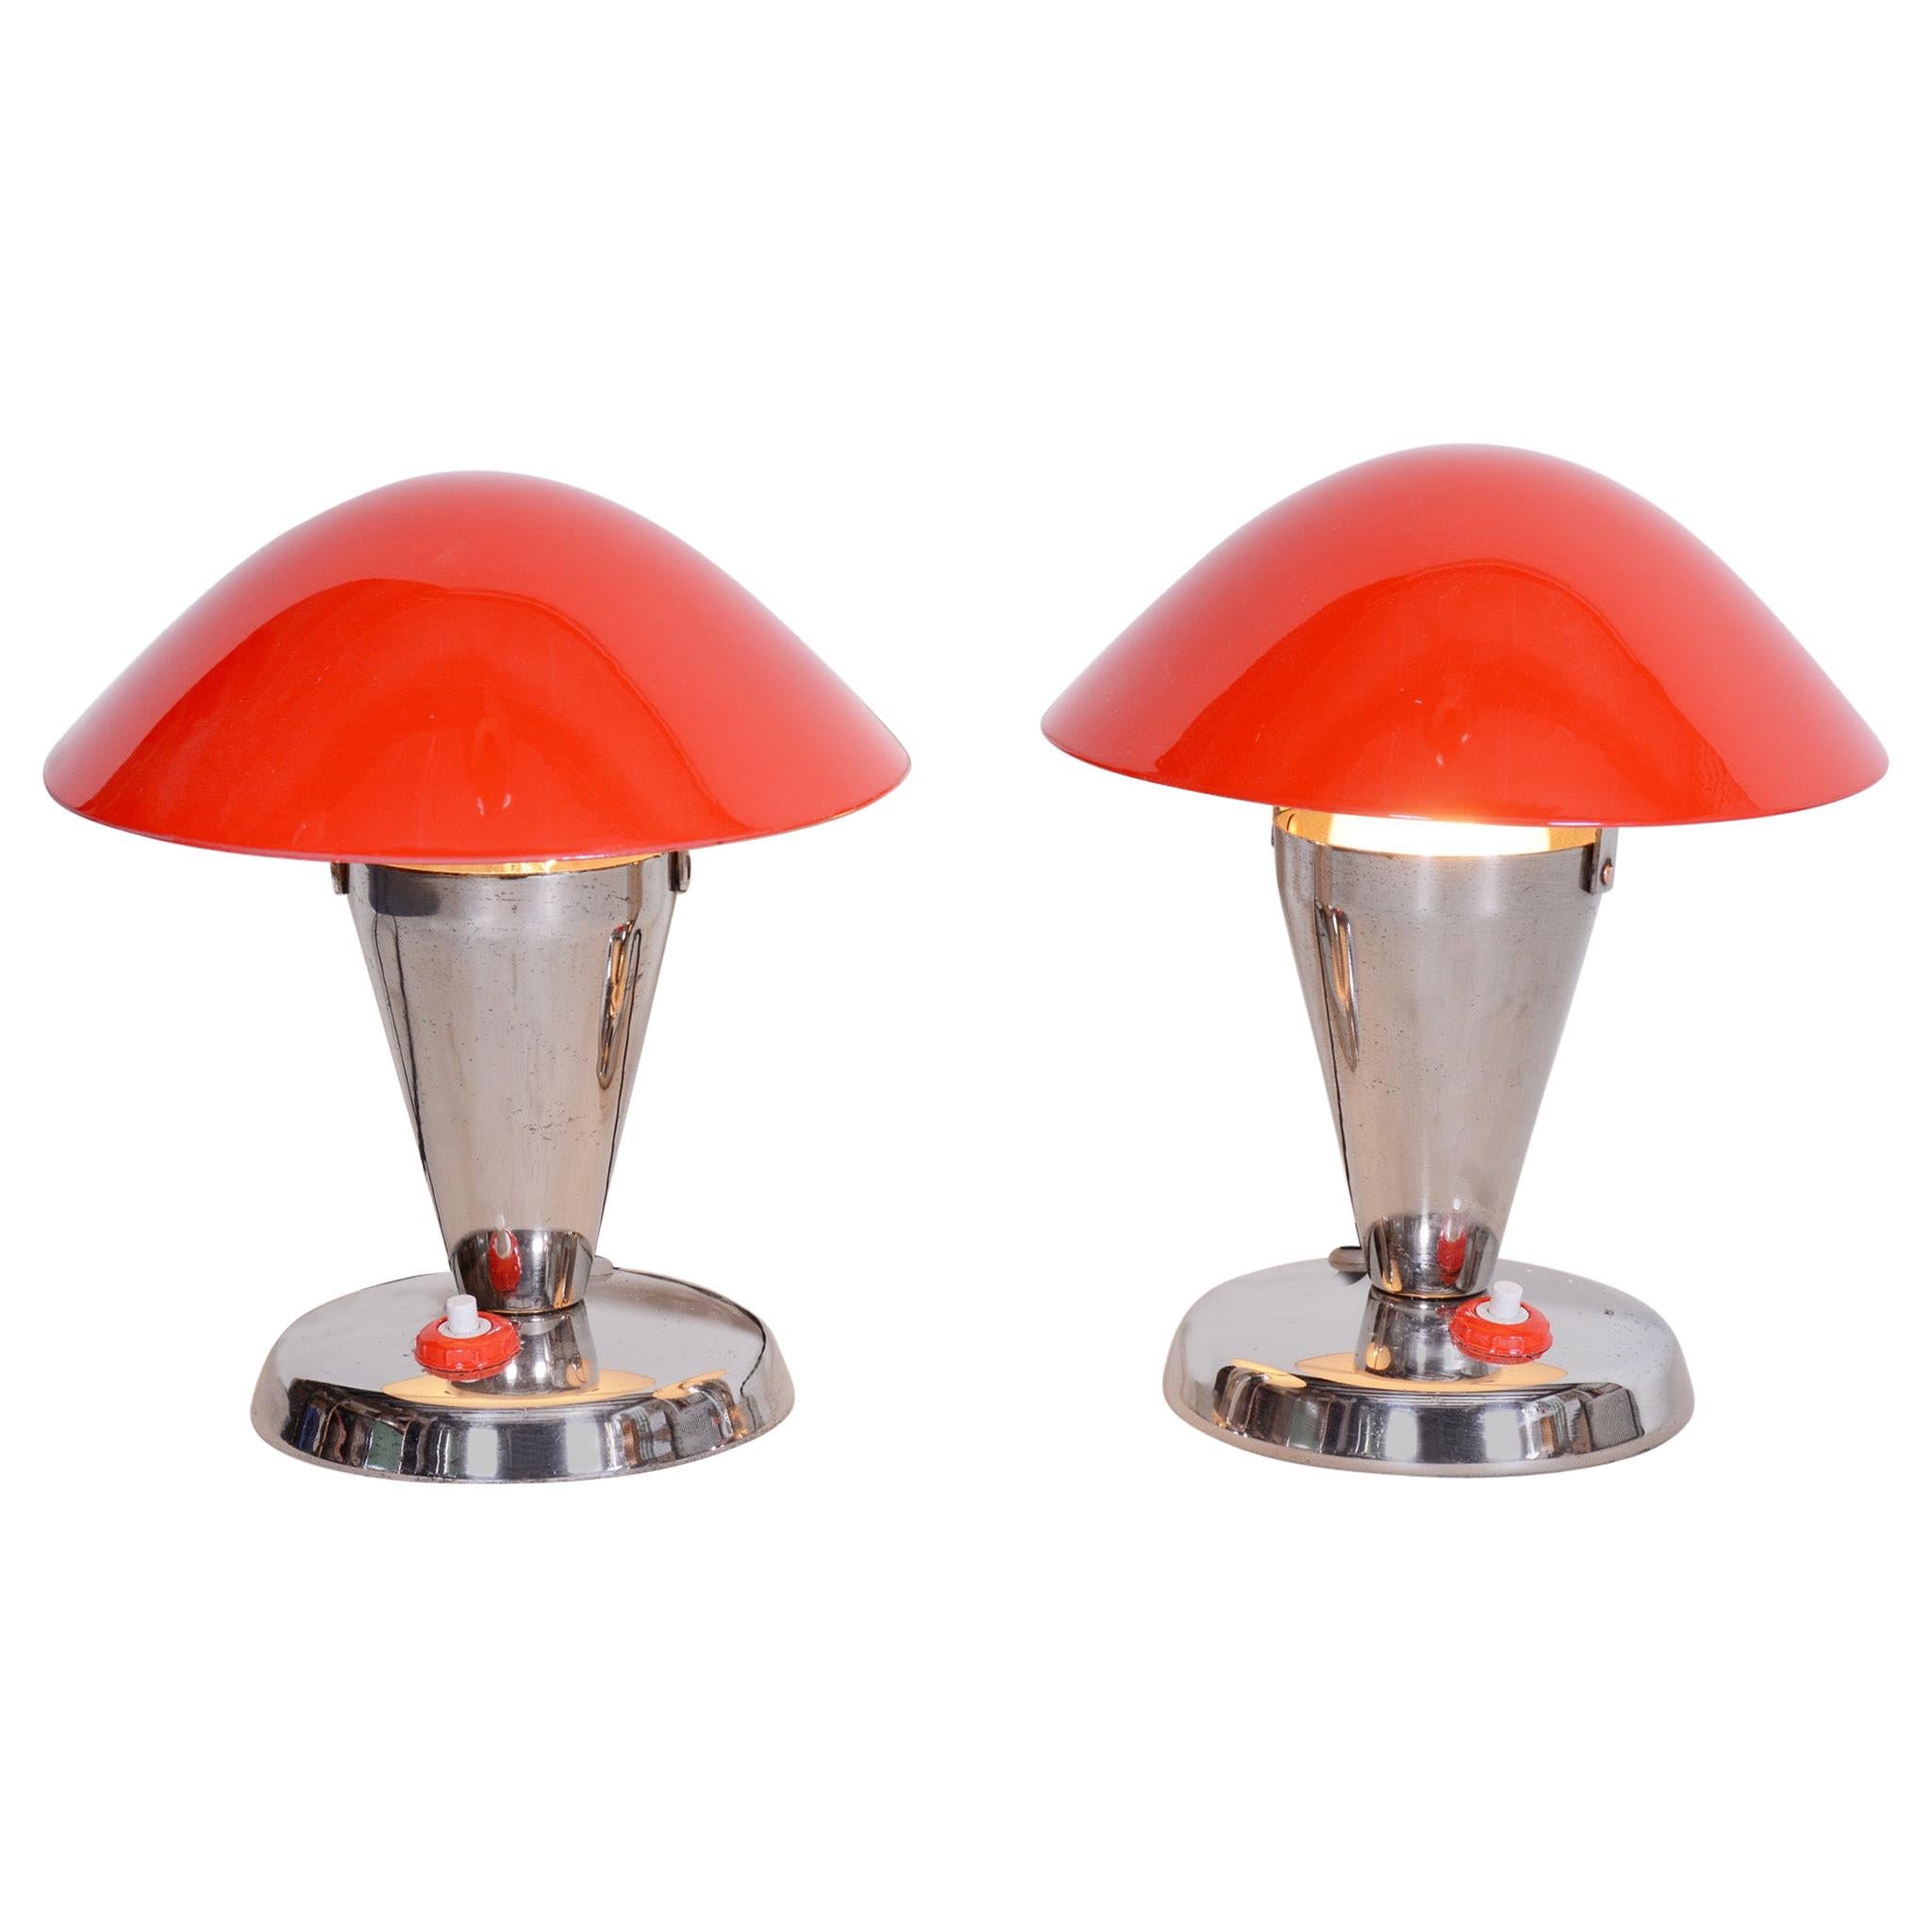 Pair of Czech Chromel Red Bauhaus Lamps, Napako, Restored and Electrified, 1930s For Sale